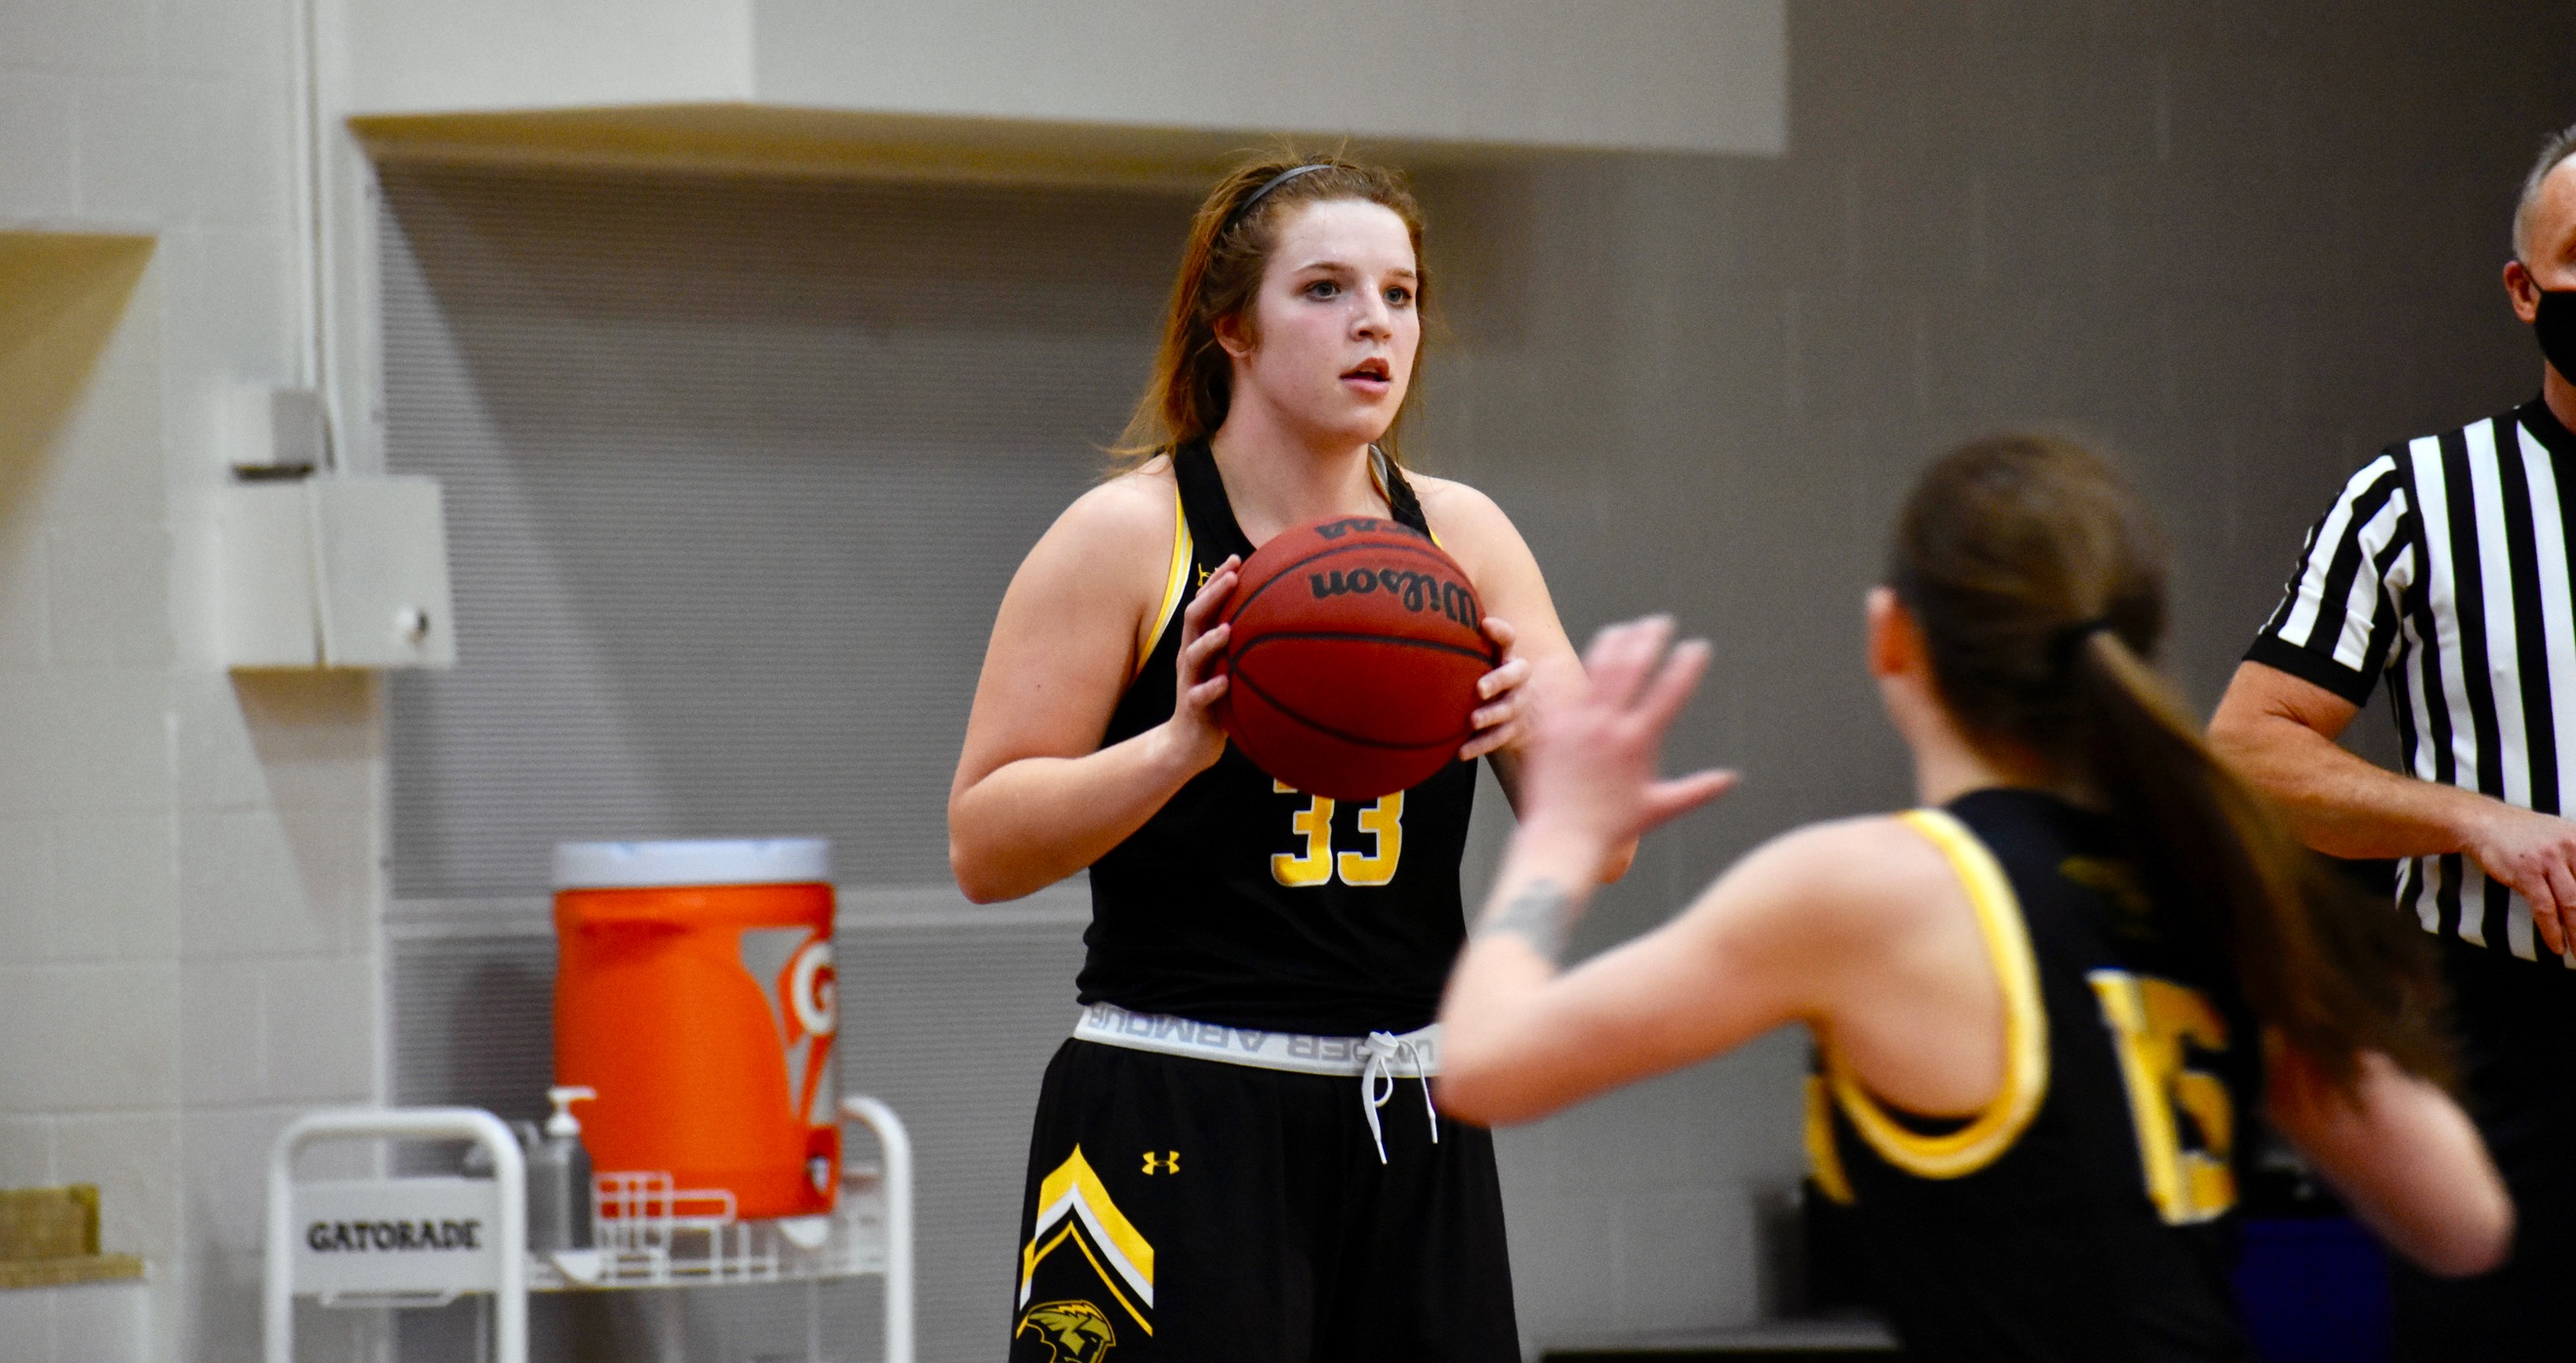 Nikki Arneson scored 11 points, including nine free throws, and grabbed six rebounds against the Warhawks.